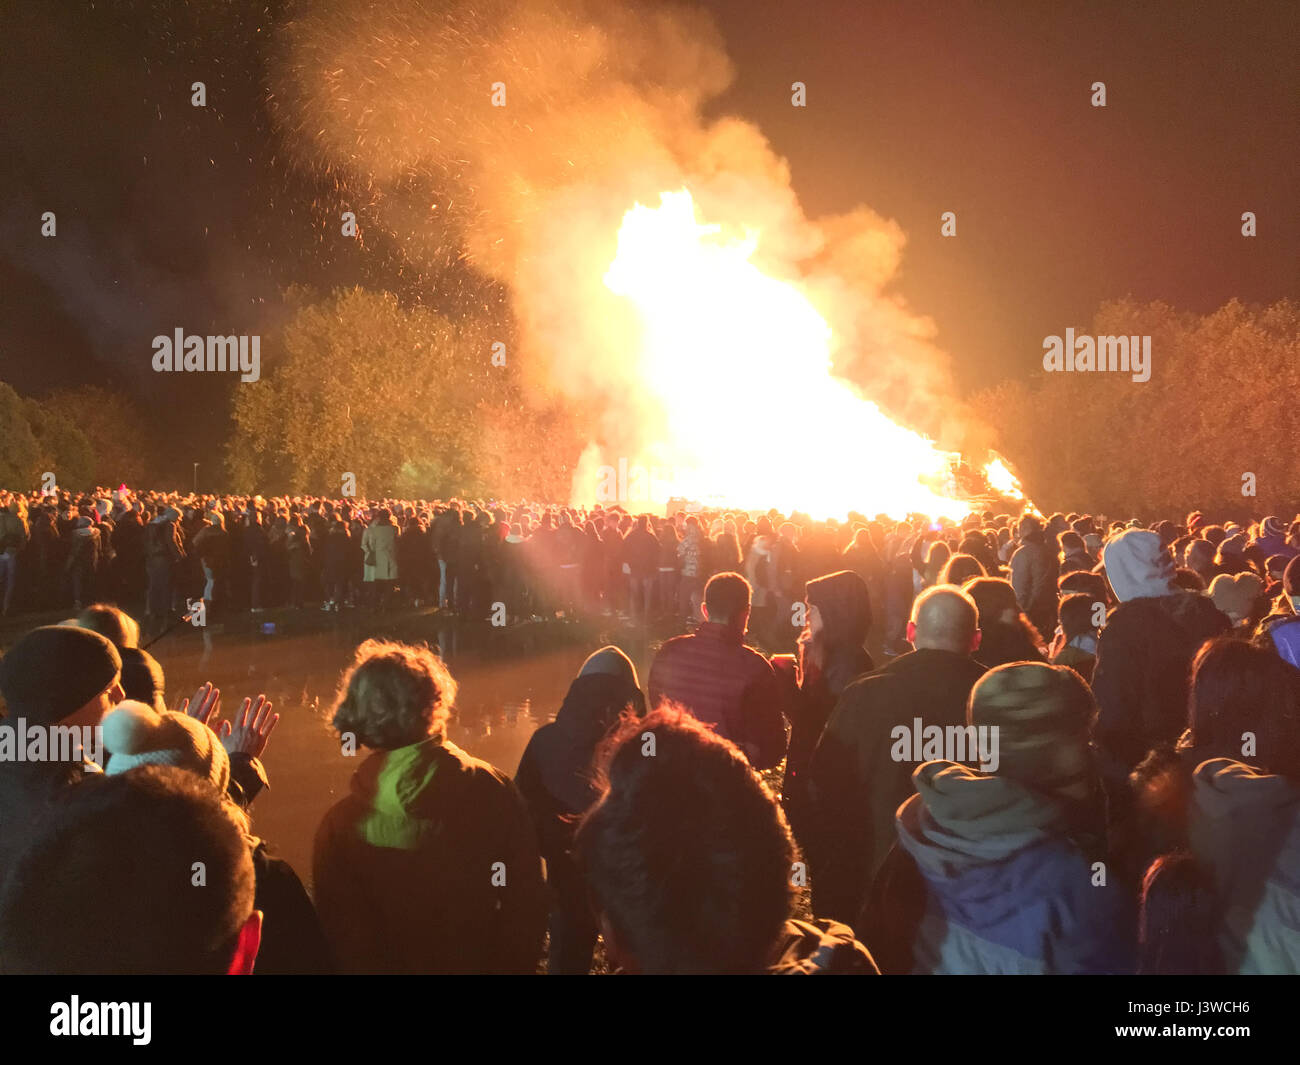 Lewes, England - 5 November 2016: Crowd gathering around the great bonfire of the yearly celebration of the Bonfire night festivities. Stock Photo